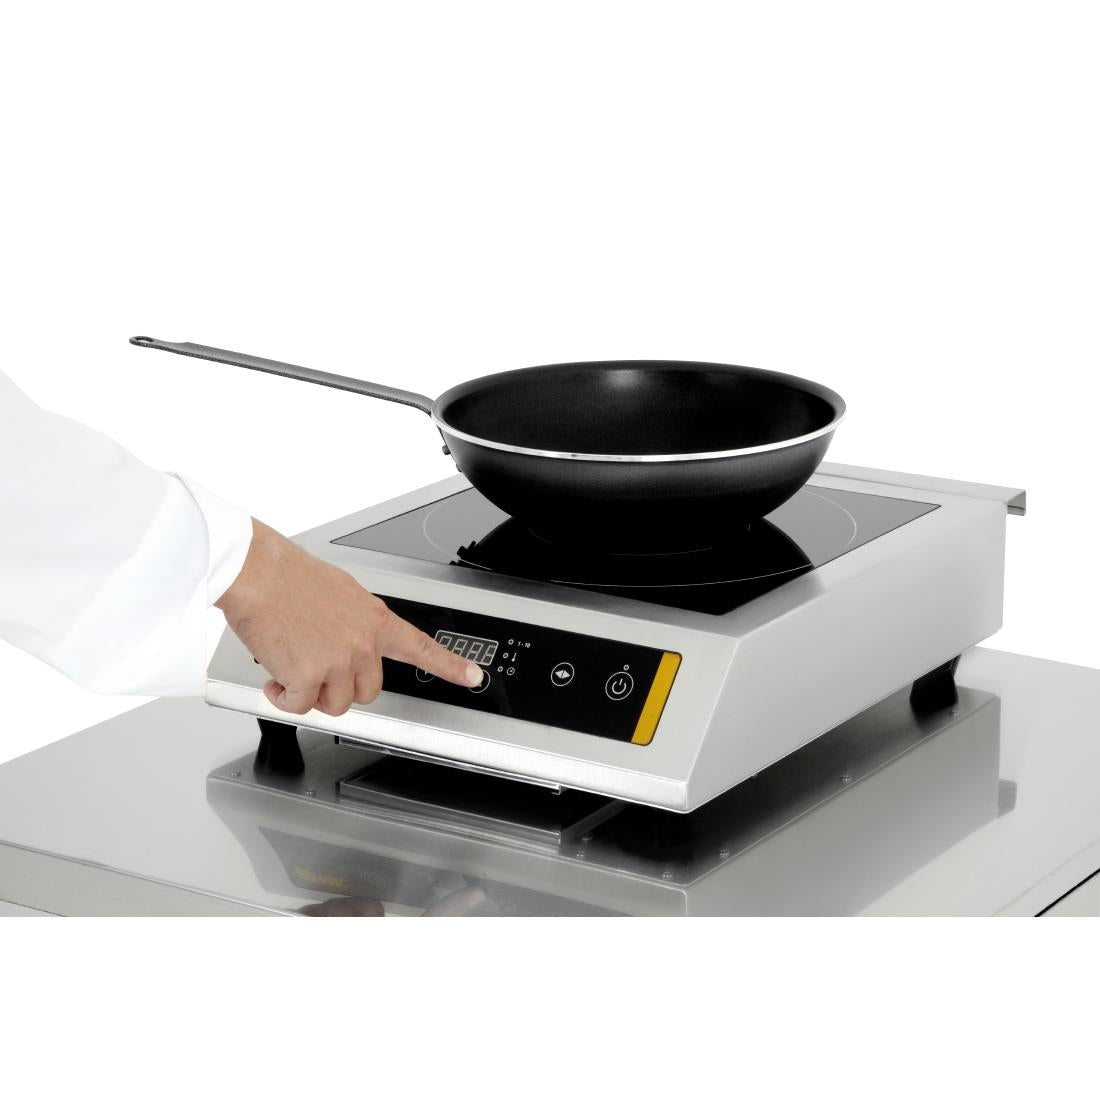 CP799 Buffalo Heavy Duty Induction Hob 3kW JD Catering Equipment Solutions Ltd